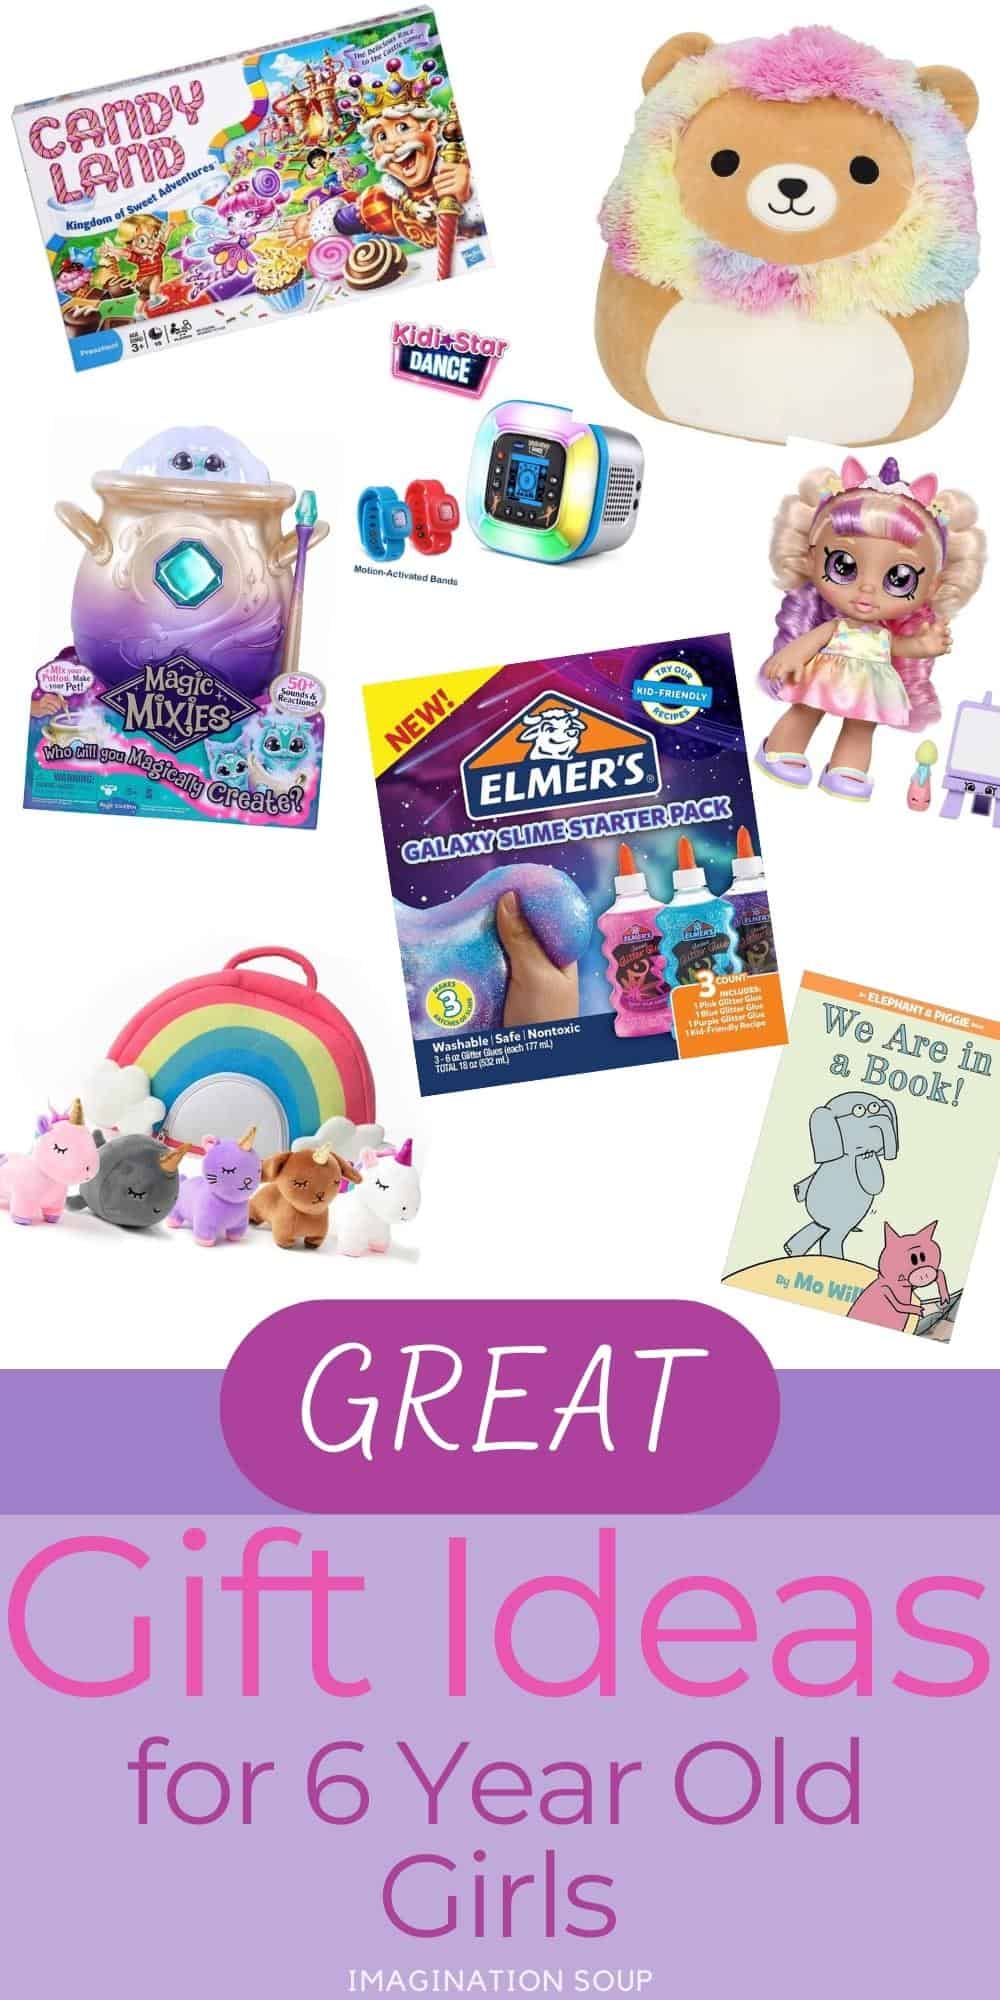 Great gift ideas for  6 year old girls 